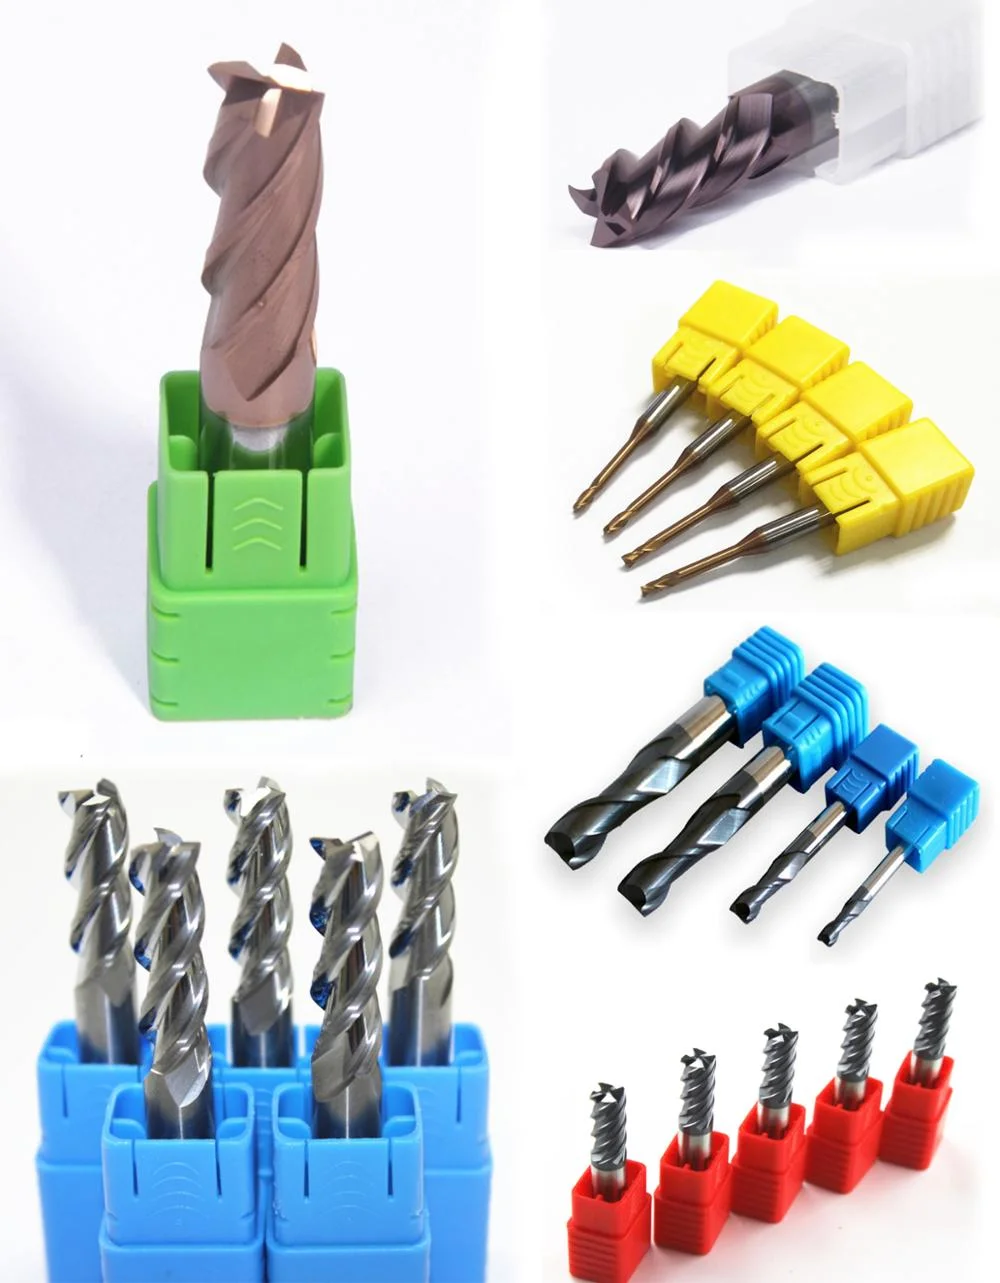 2021 Clearance Sale HSS Drill Bits Customized Factory Wood Milling Cutter End Mill Carbide Tools Center Drill Bit